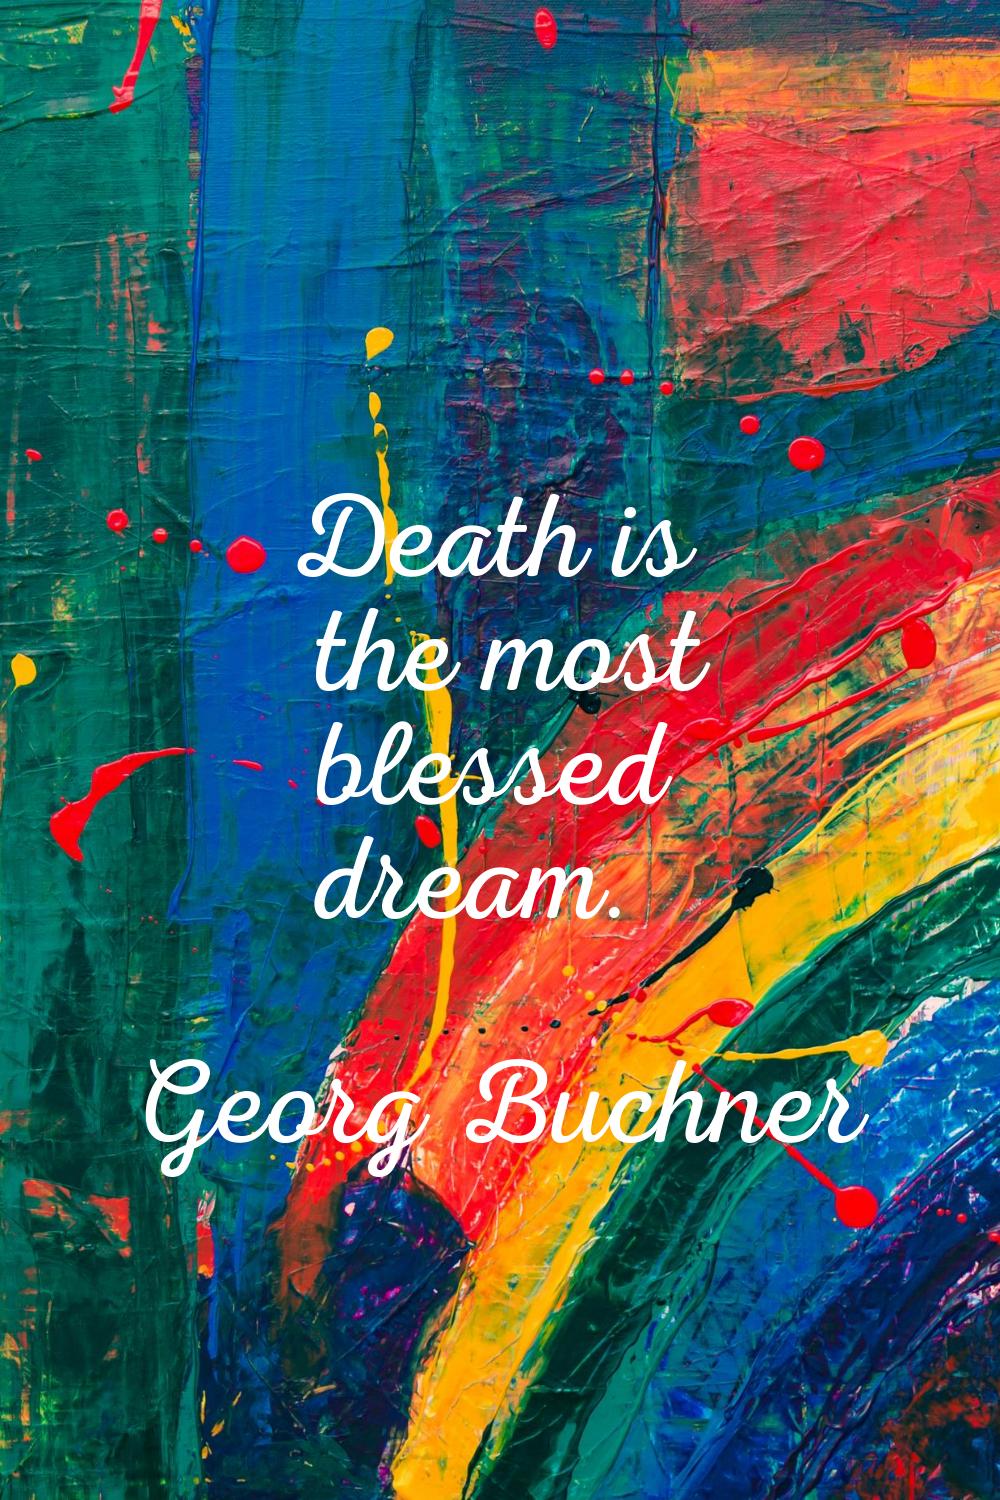 Death is the most blessed dream.